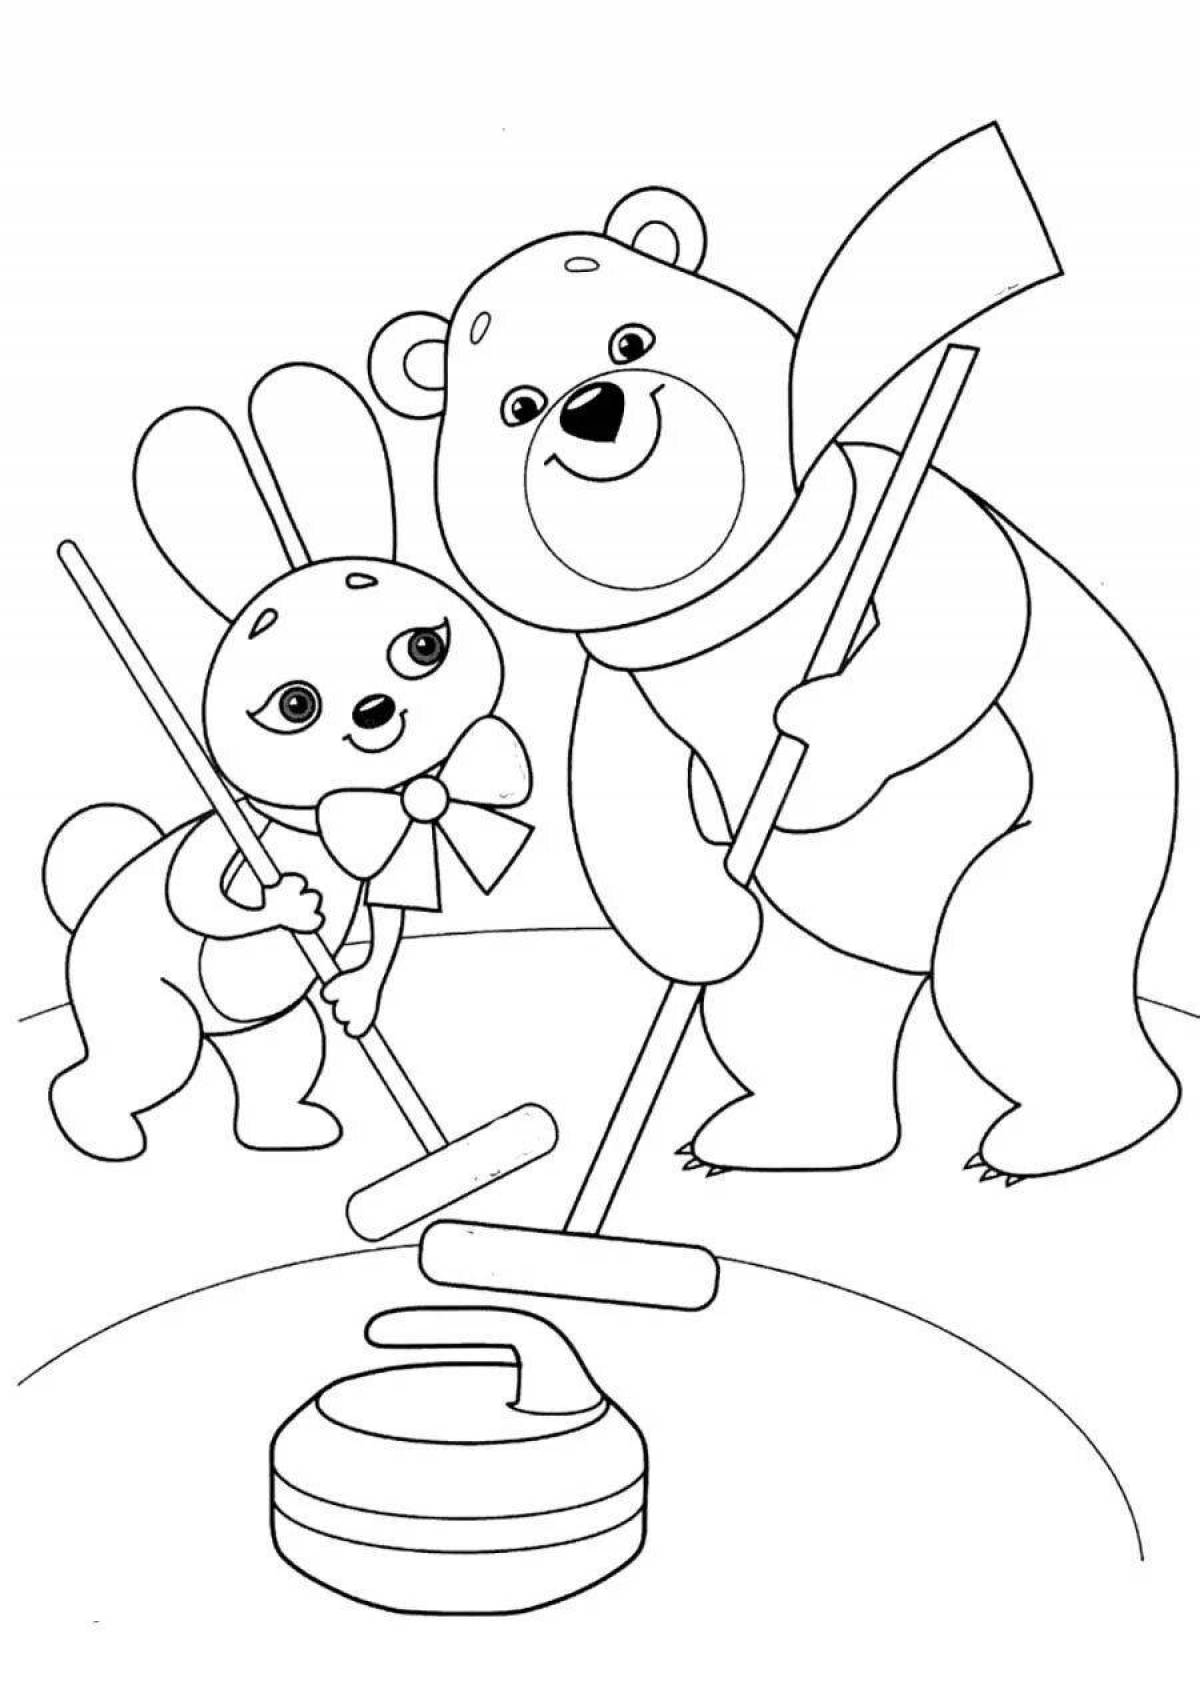 Colourful coloring for children's olympic sports